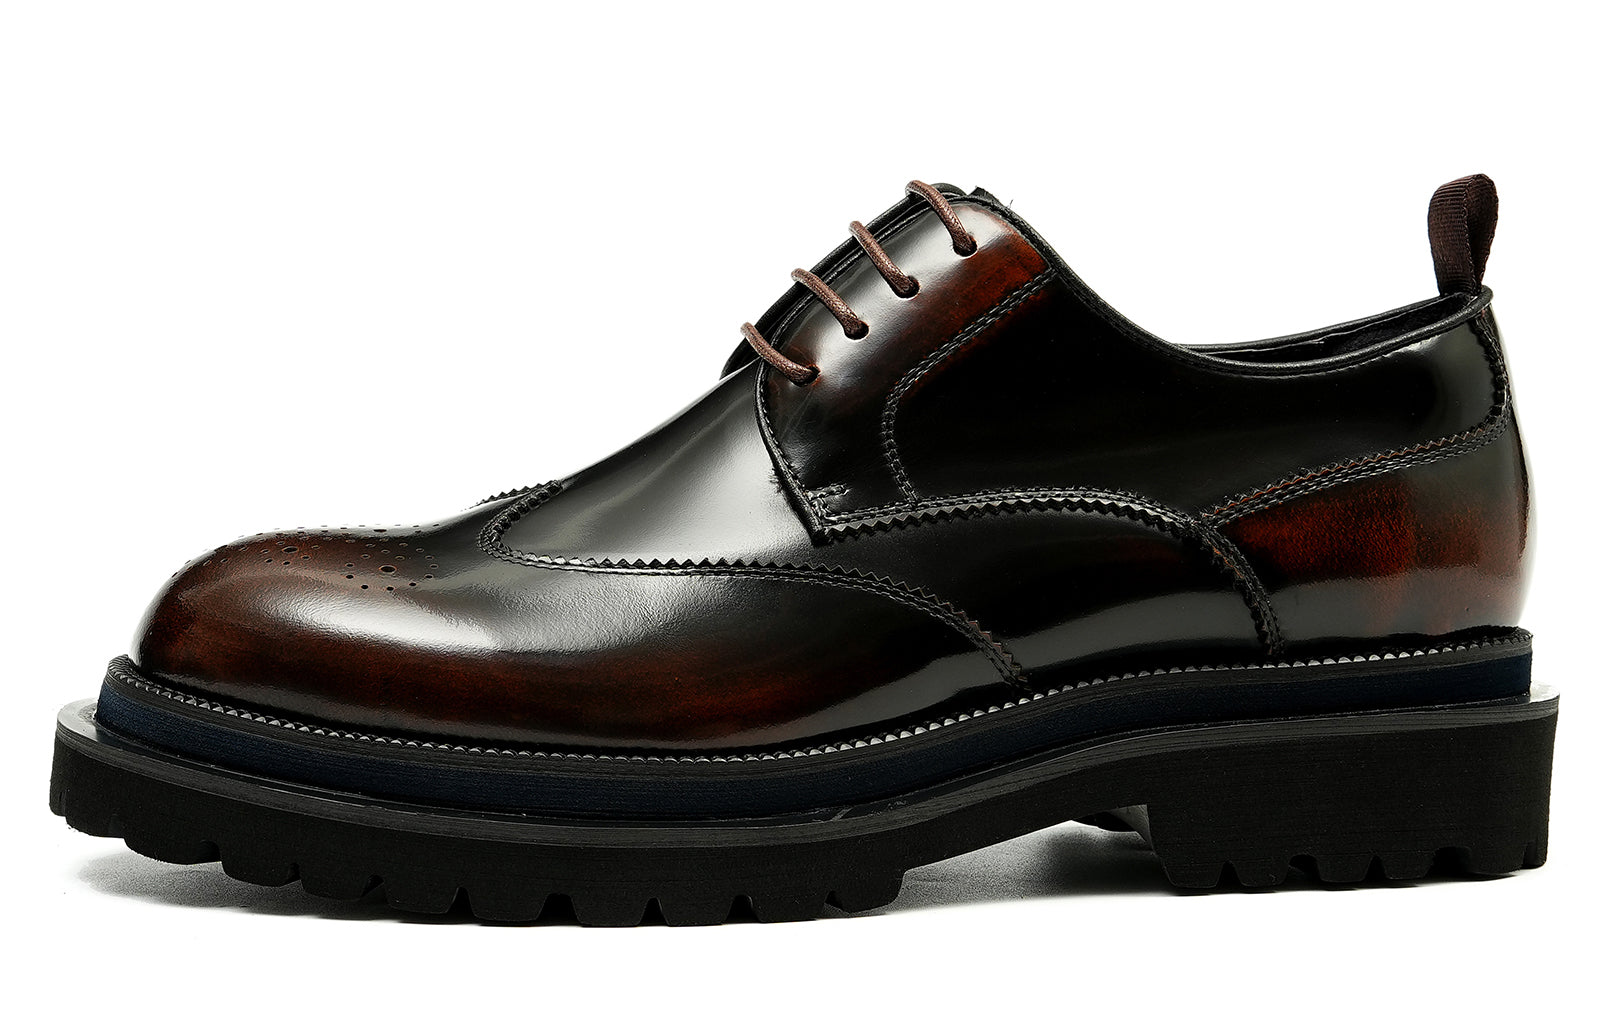 Men's Thick Sole Brogues Derby